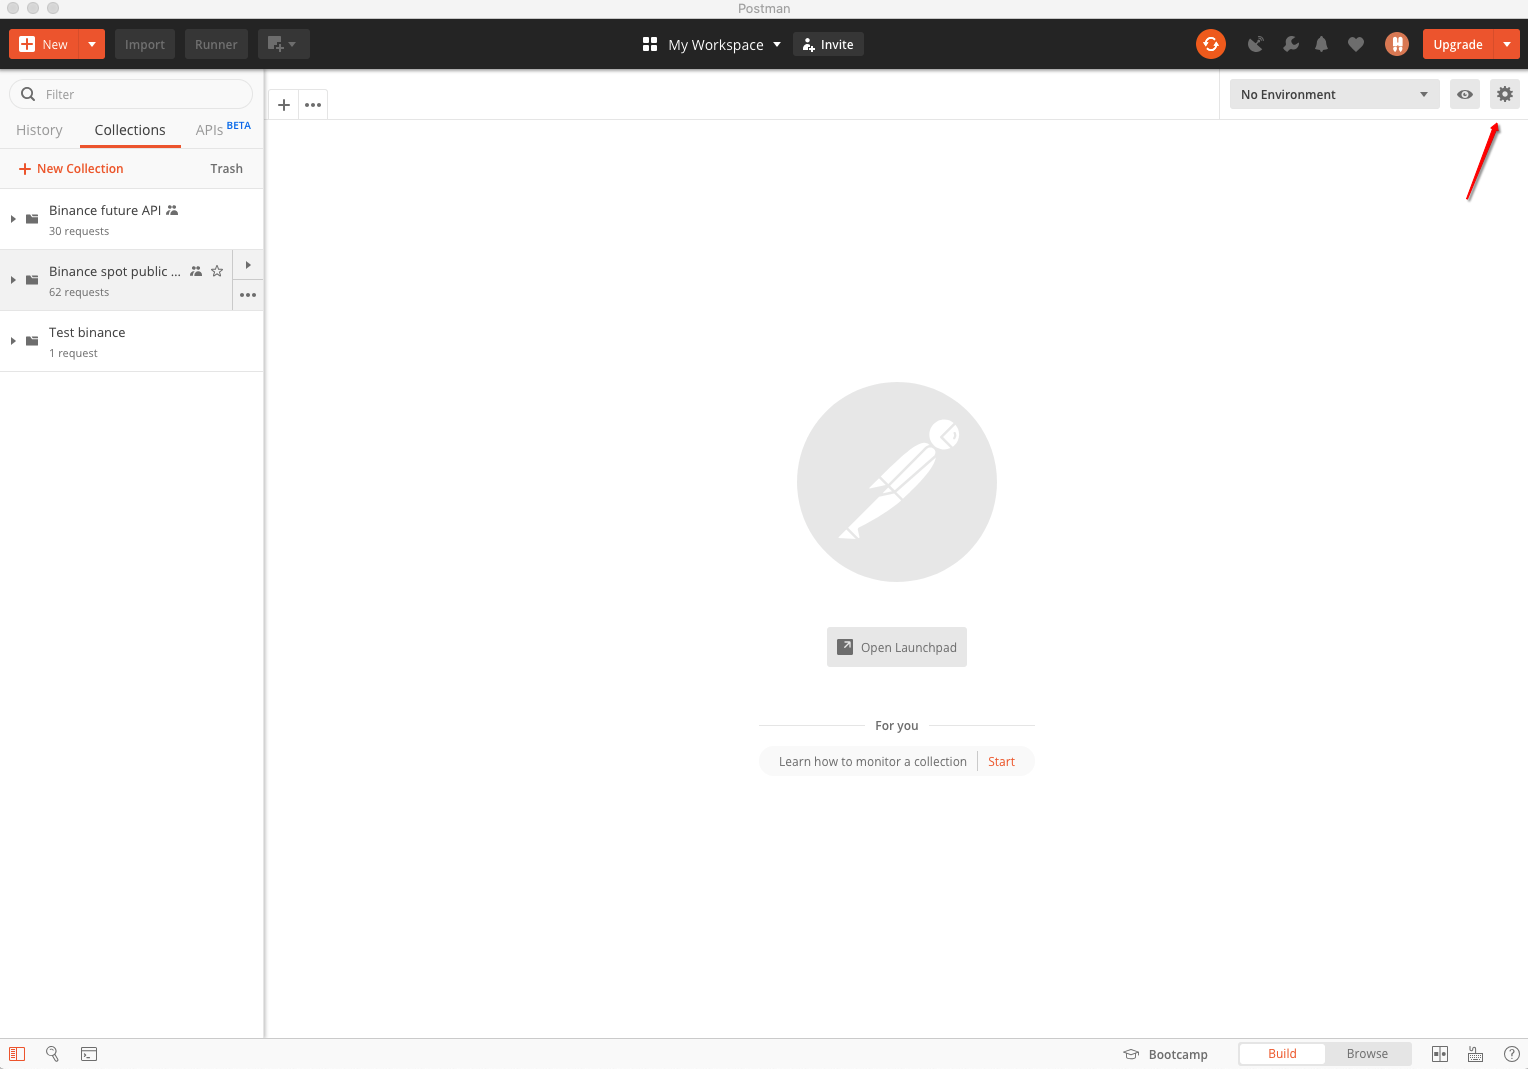 Screenshot of Postman for Mac, with 'Manage Environments' button pointed out at top right.